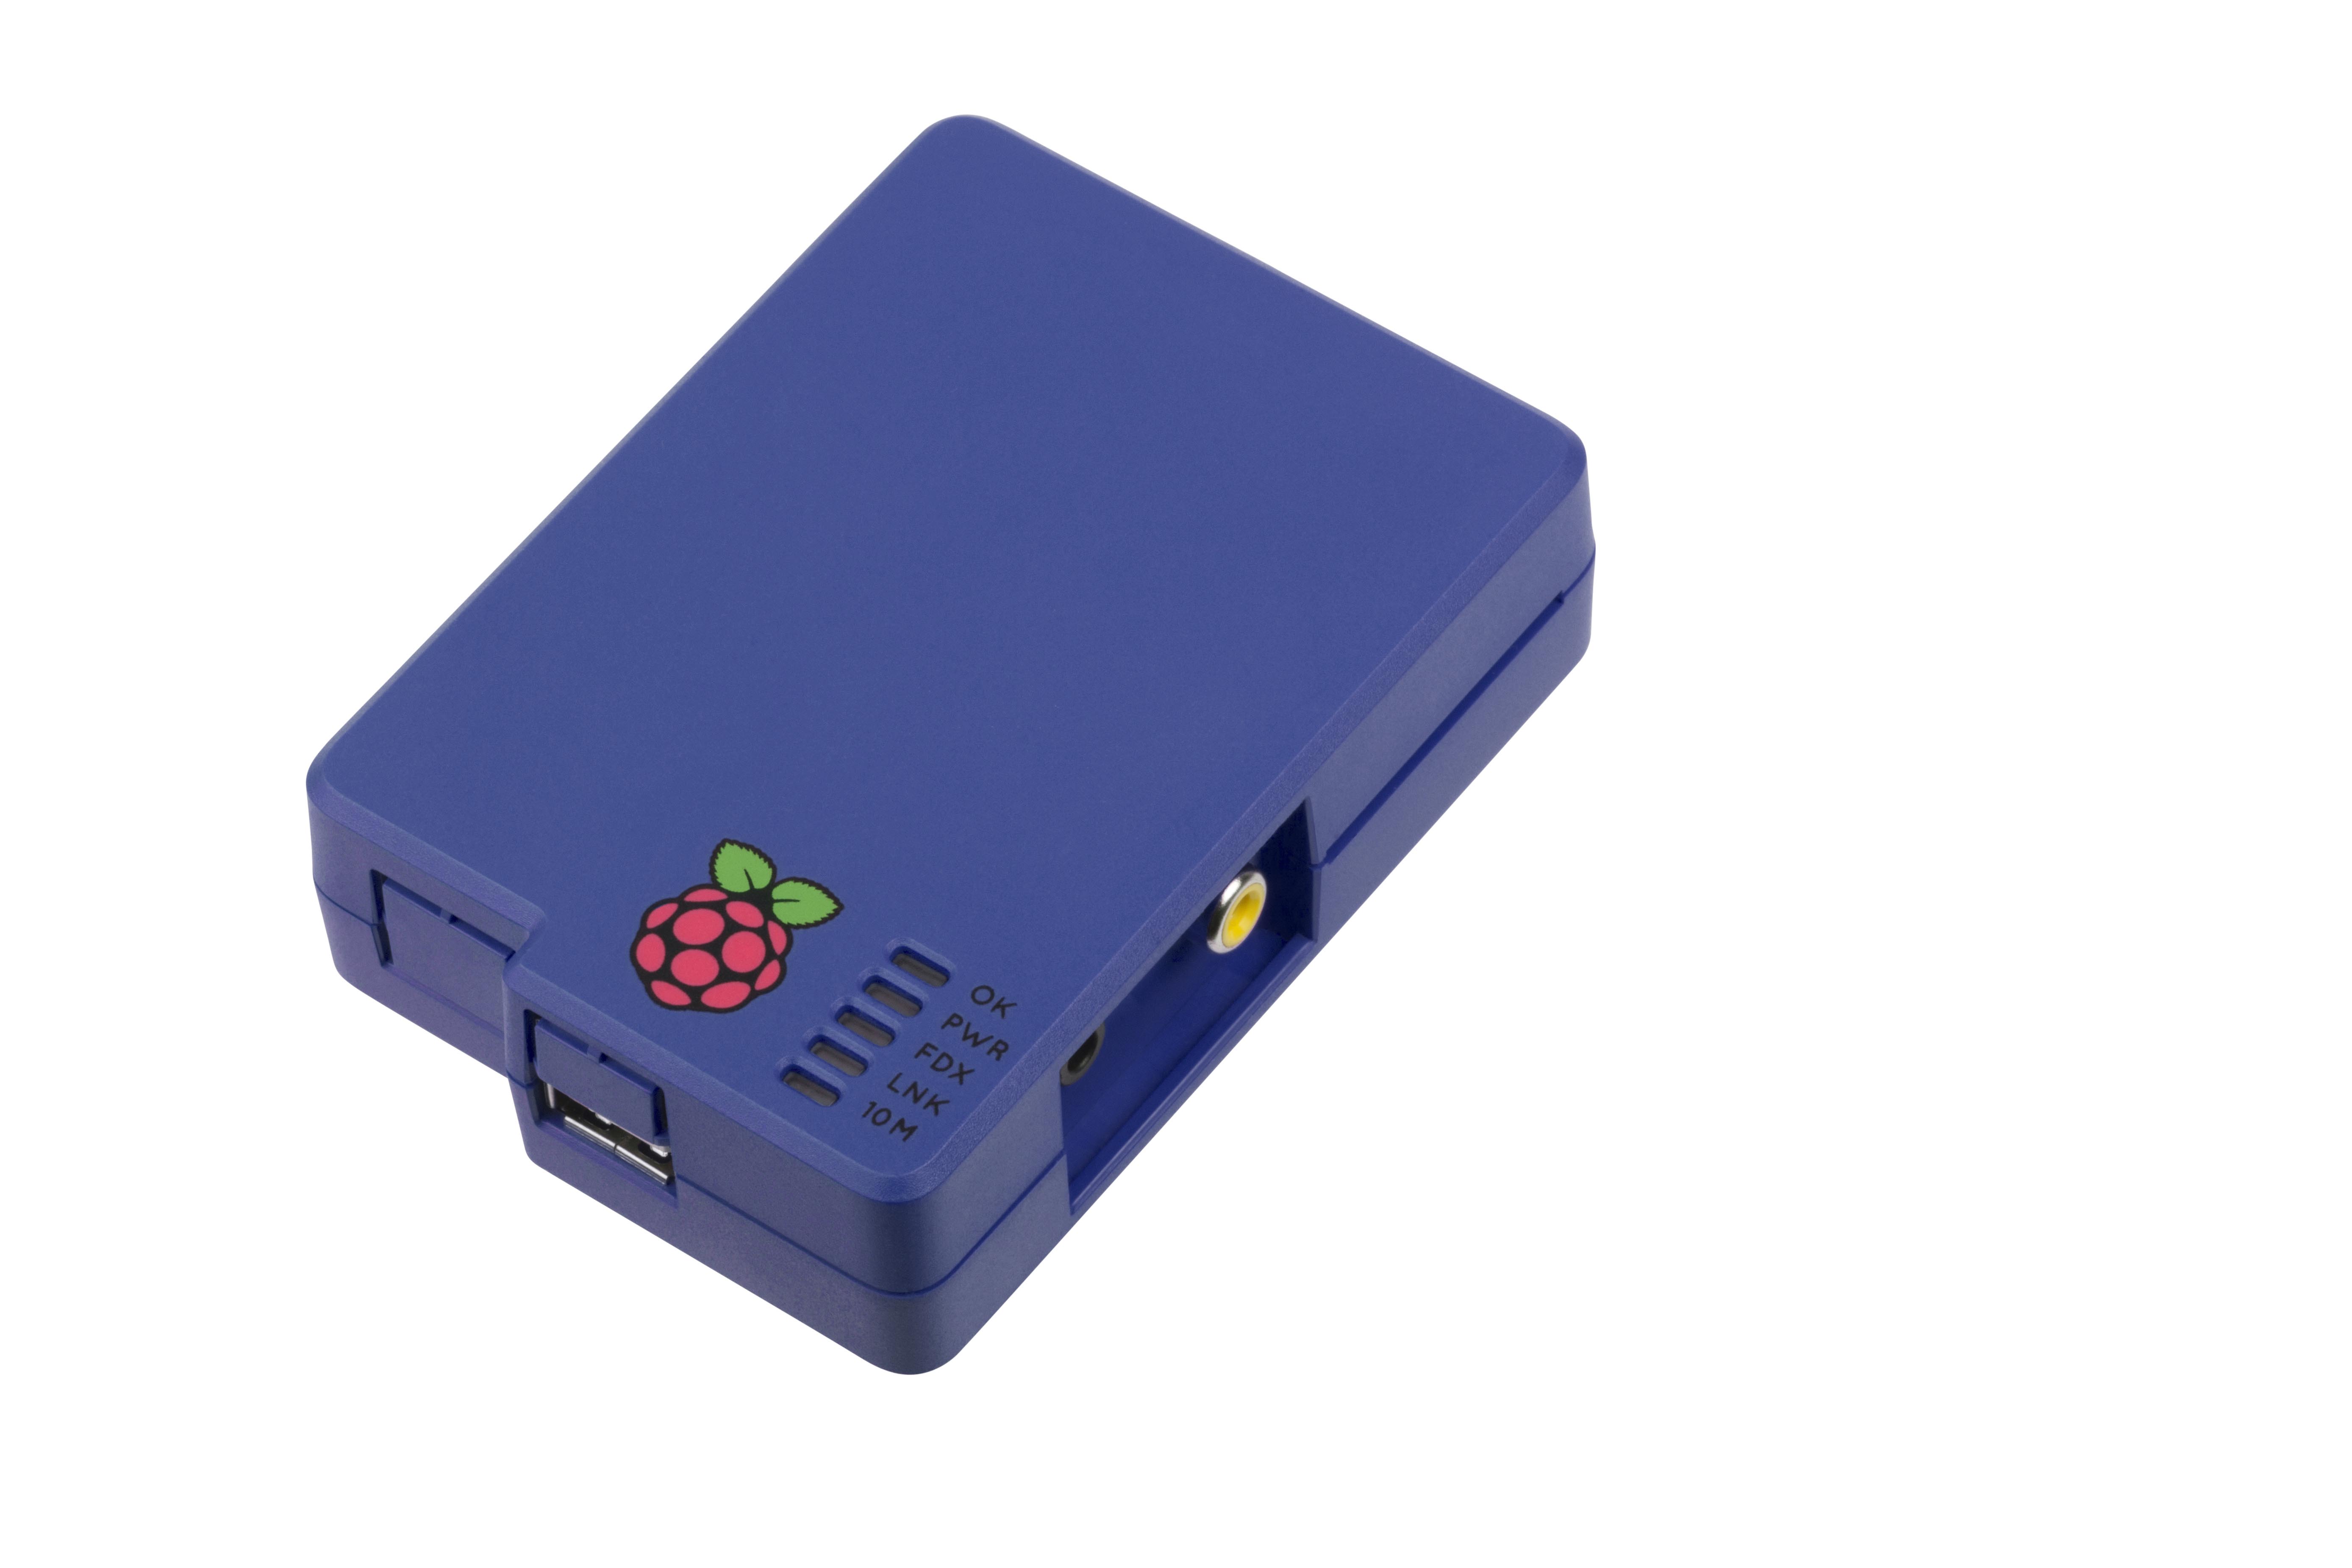 And when does Raspberry Pi go green?